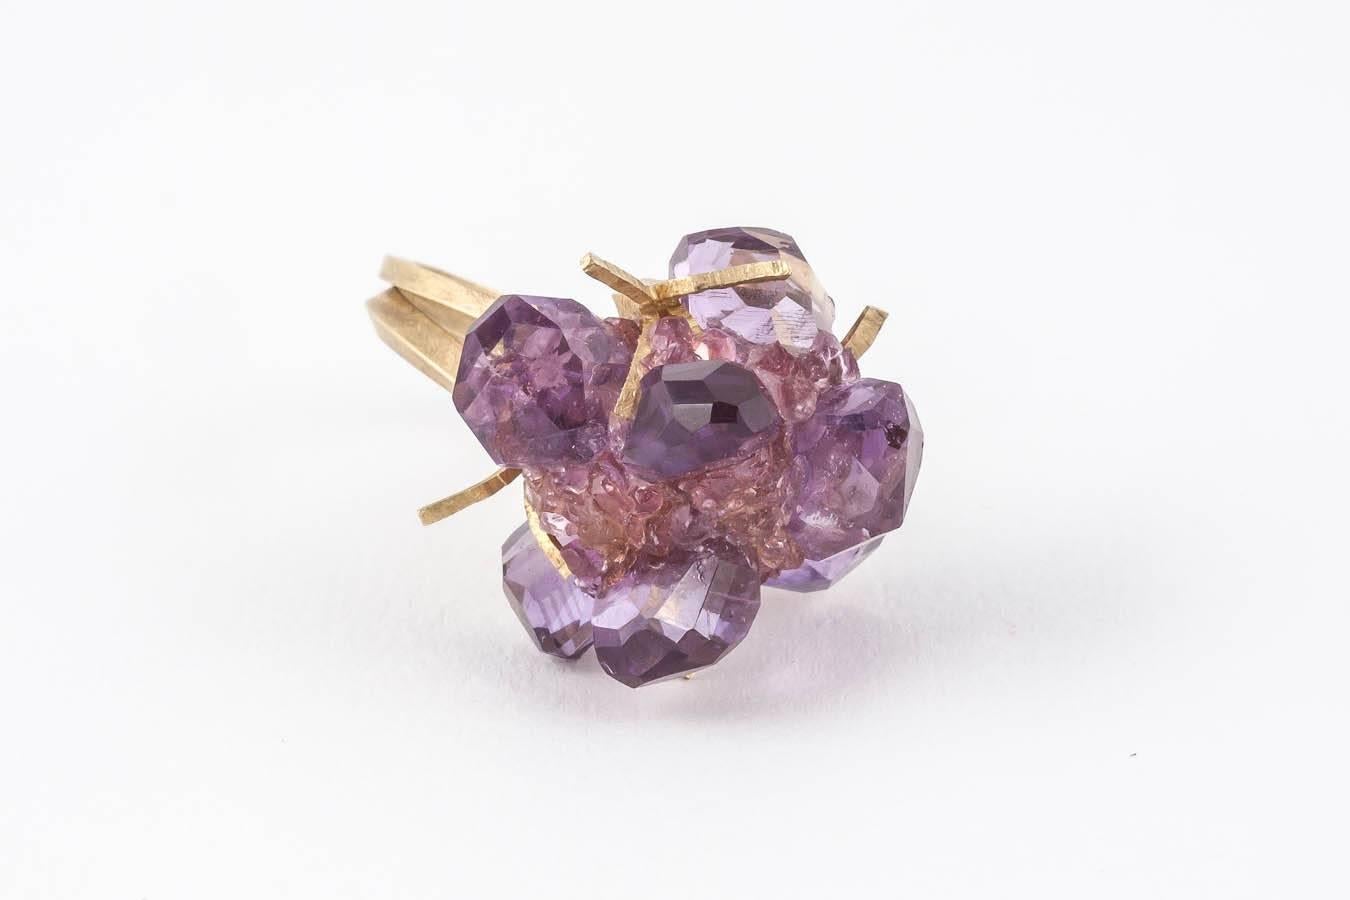 18ct Gold hand-crafted Donna Brennan Cocktail Ring. Featuring unusual facetted Amethyst stones & crushed Pink Tourmaline with 2 matt gold ring shanks entwined in a size 6 ( L ).

Donna's work typically features sculpturally wrapped rings hewn from